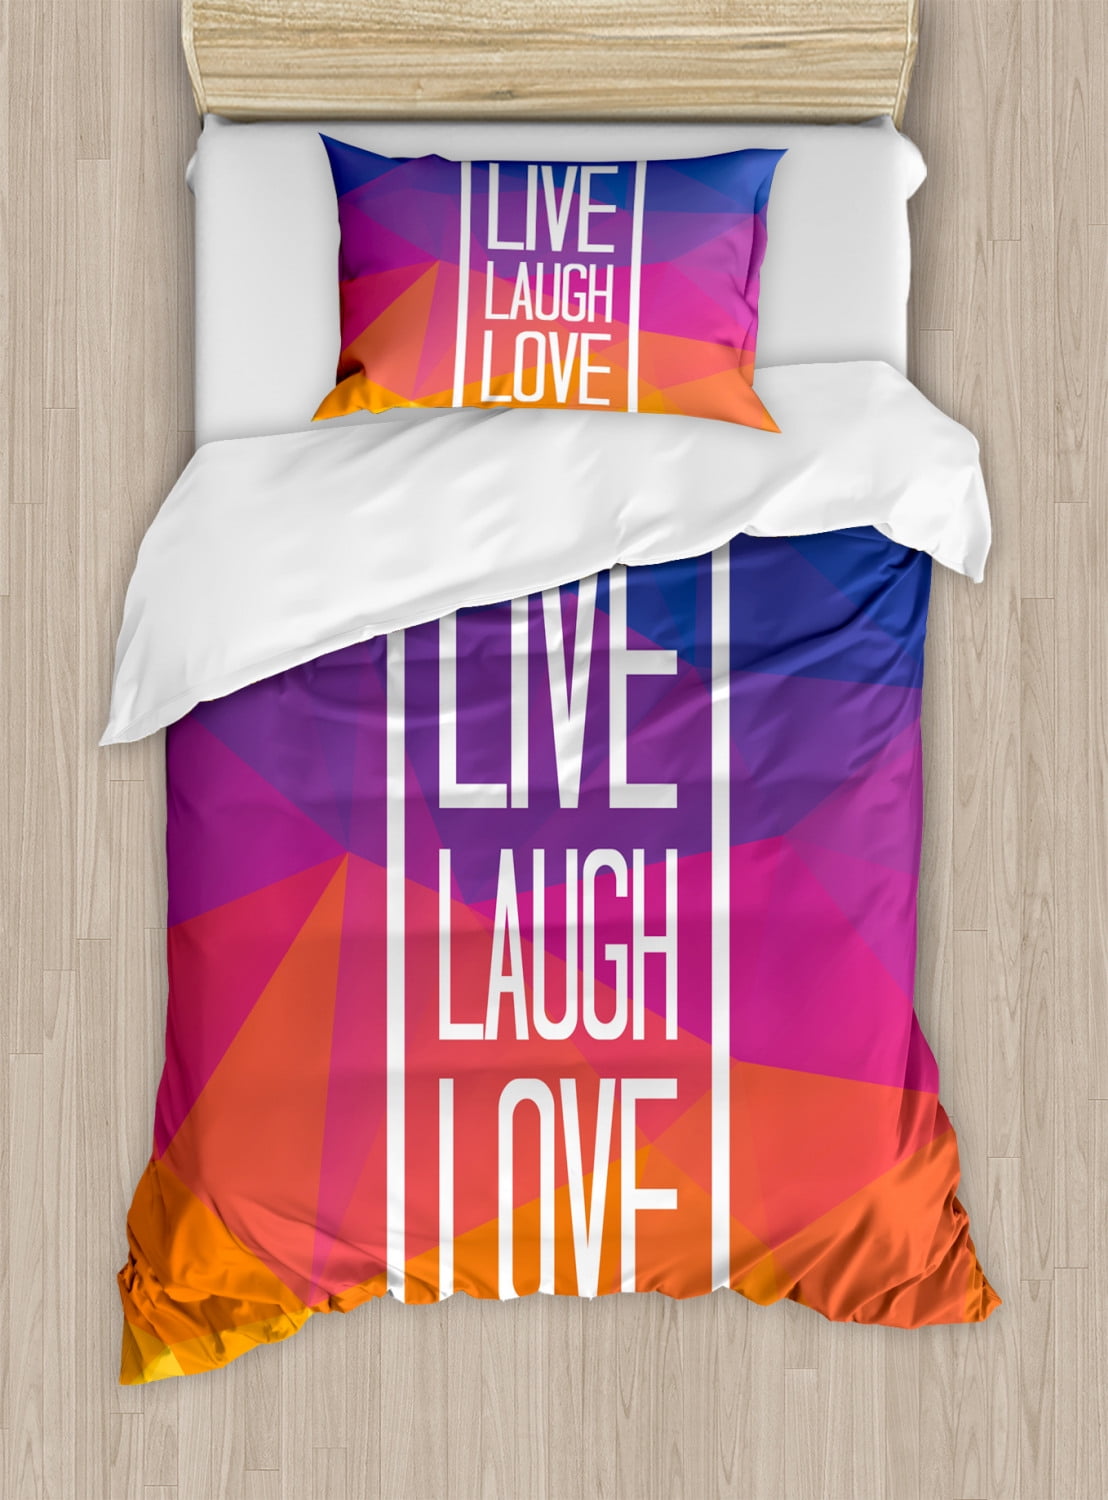 Live Laugh Love Duvet Cover Set Twin Size, Famous Slogan Framework with  Triangulated Low Poly Effects Colorful Print, Decorative 2 Piece Bedding  Set 